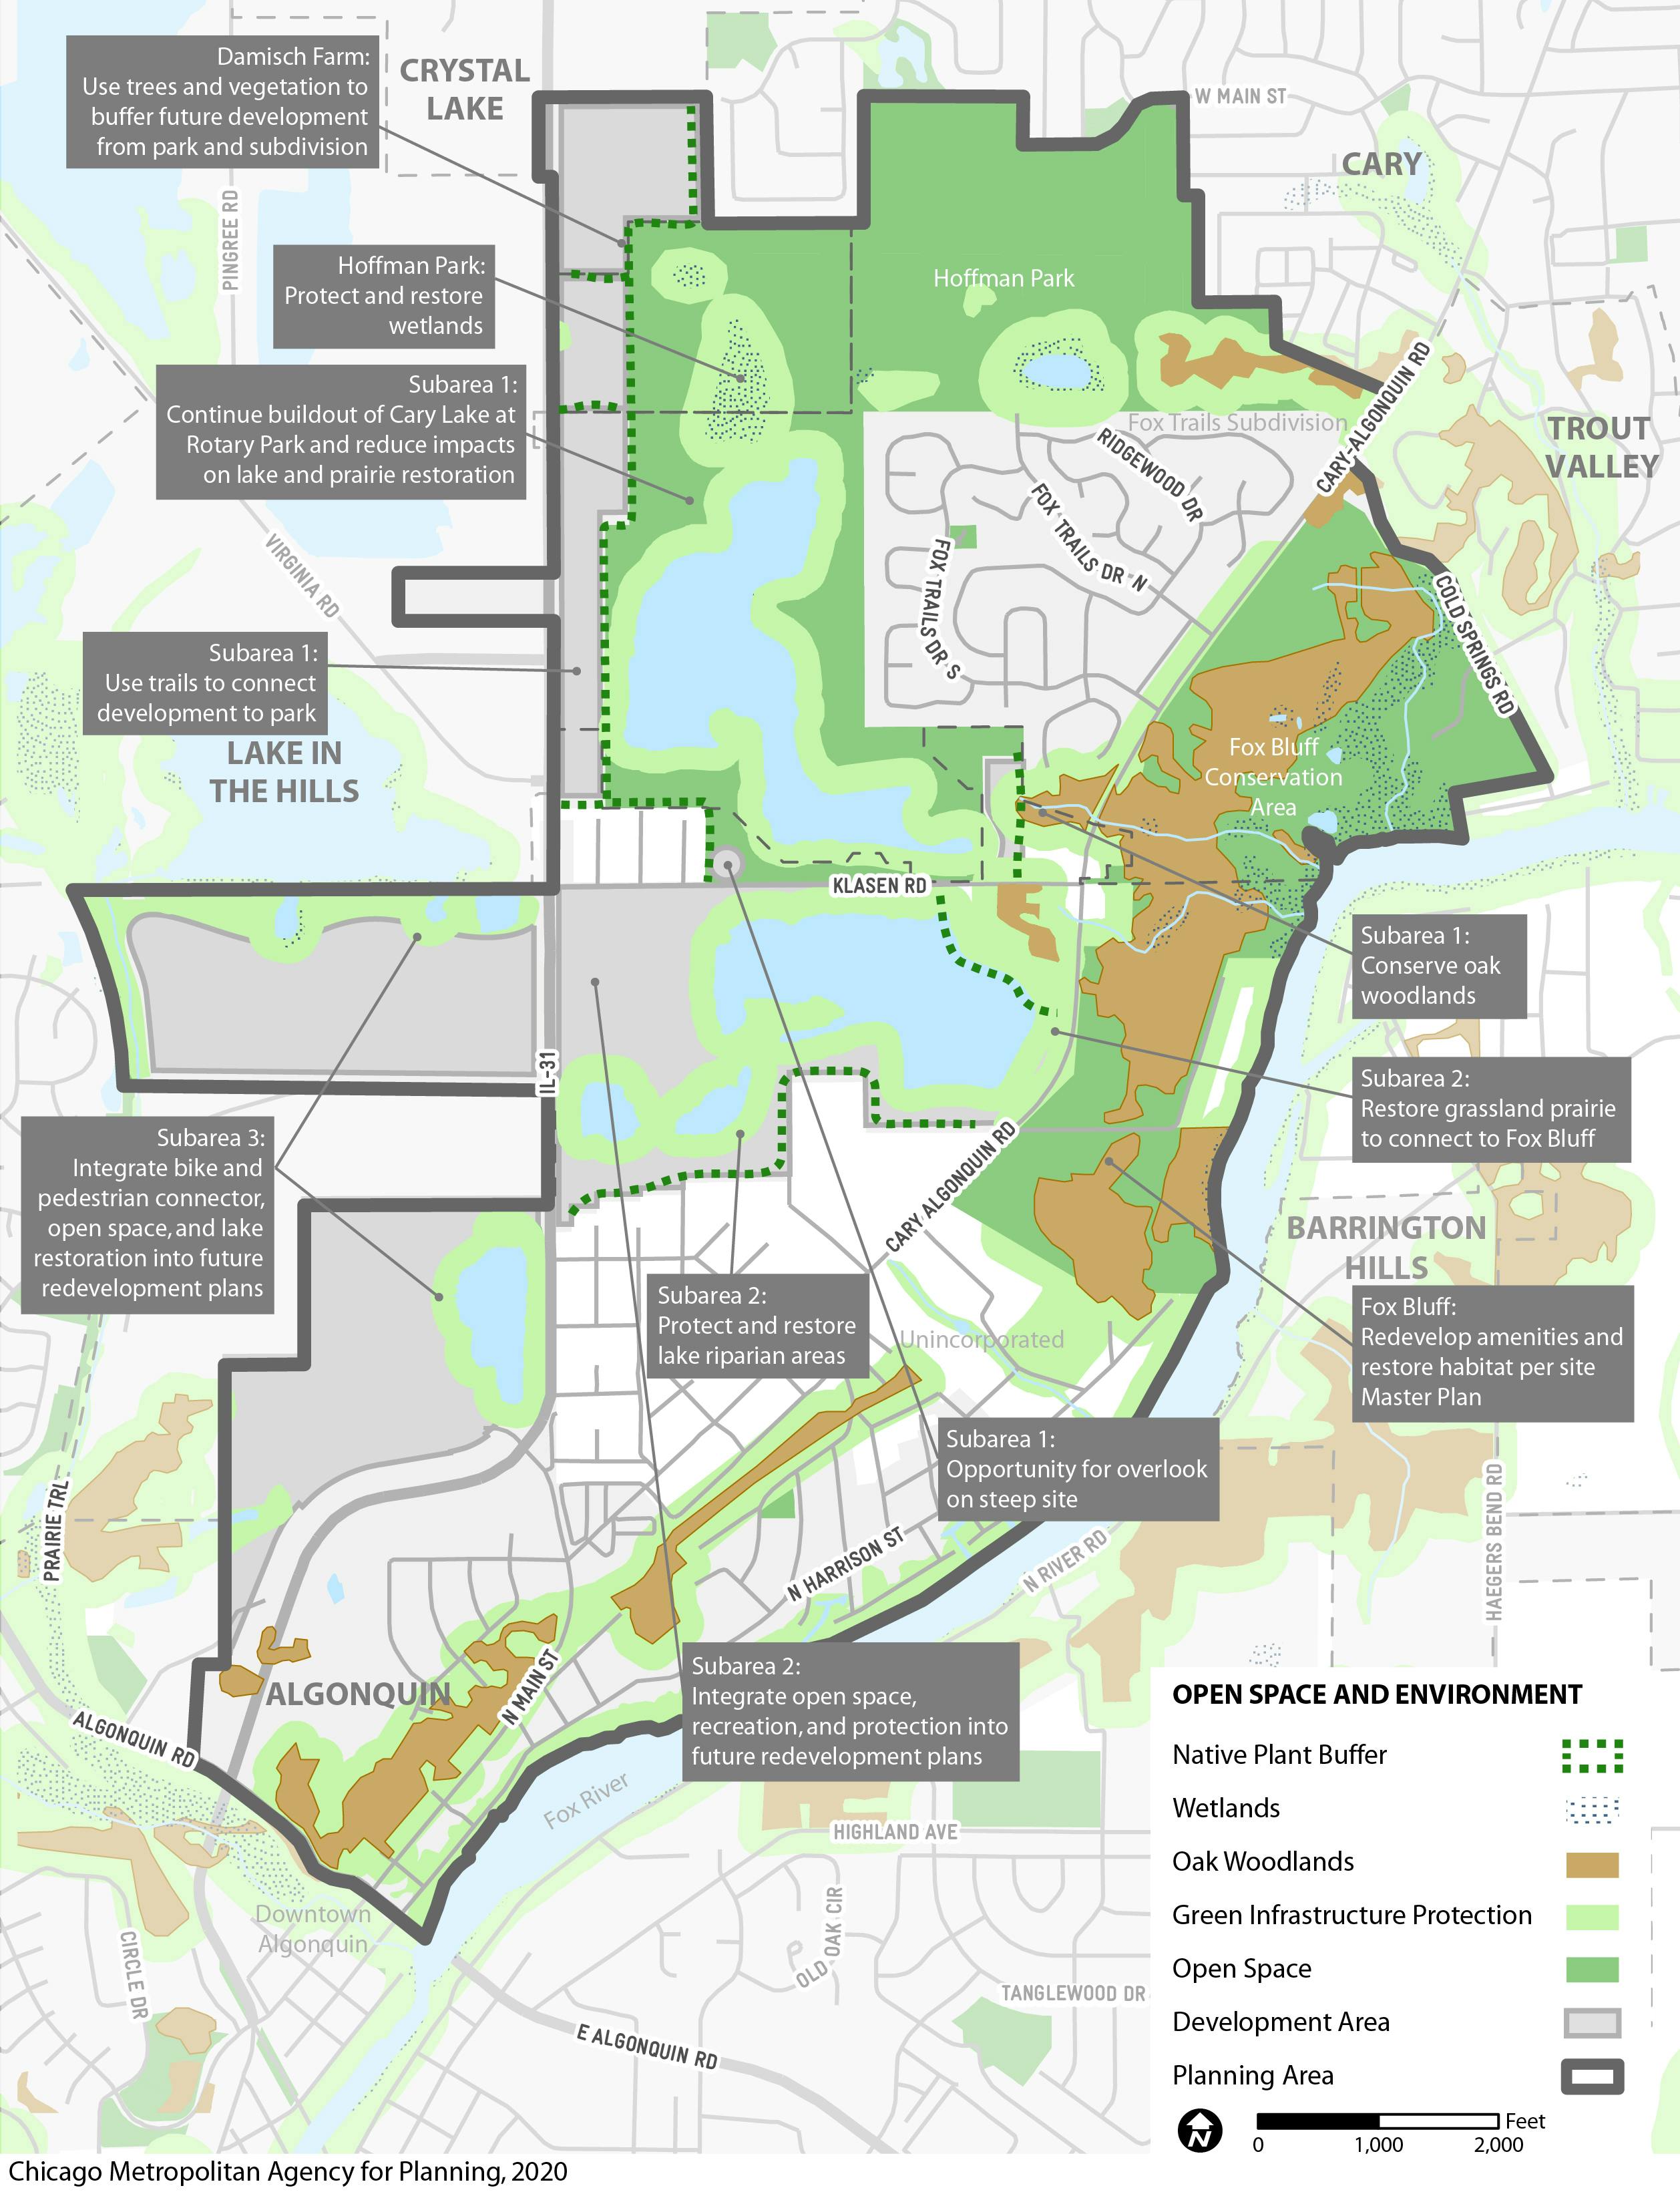 Open Space and Environment plan